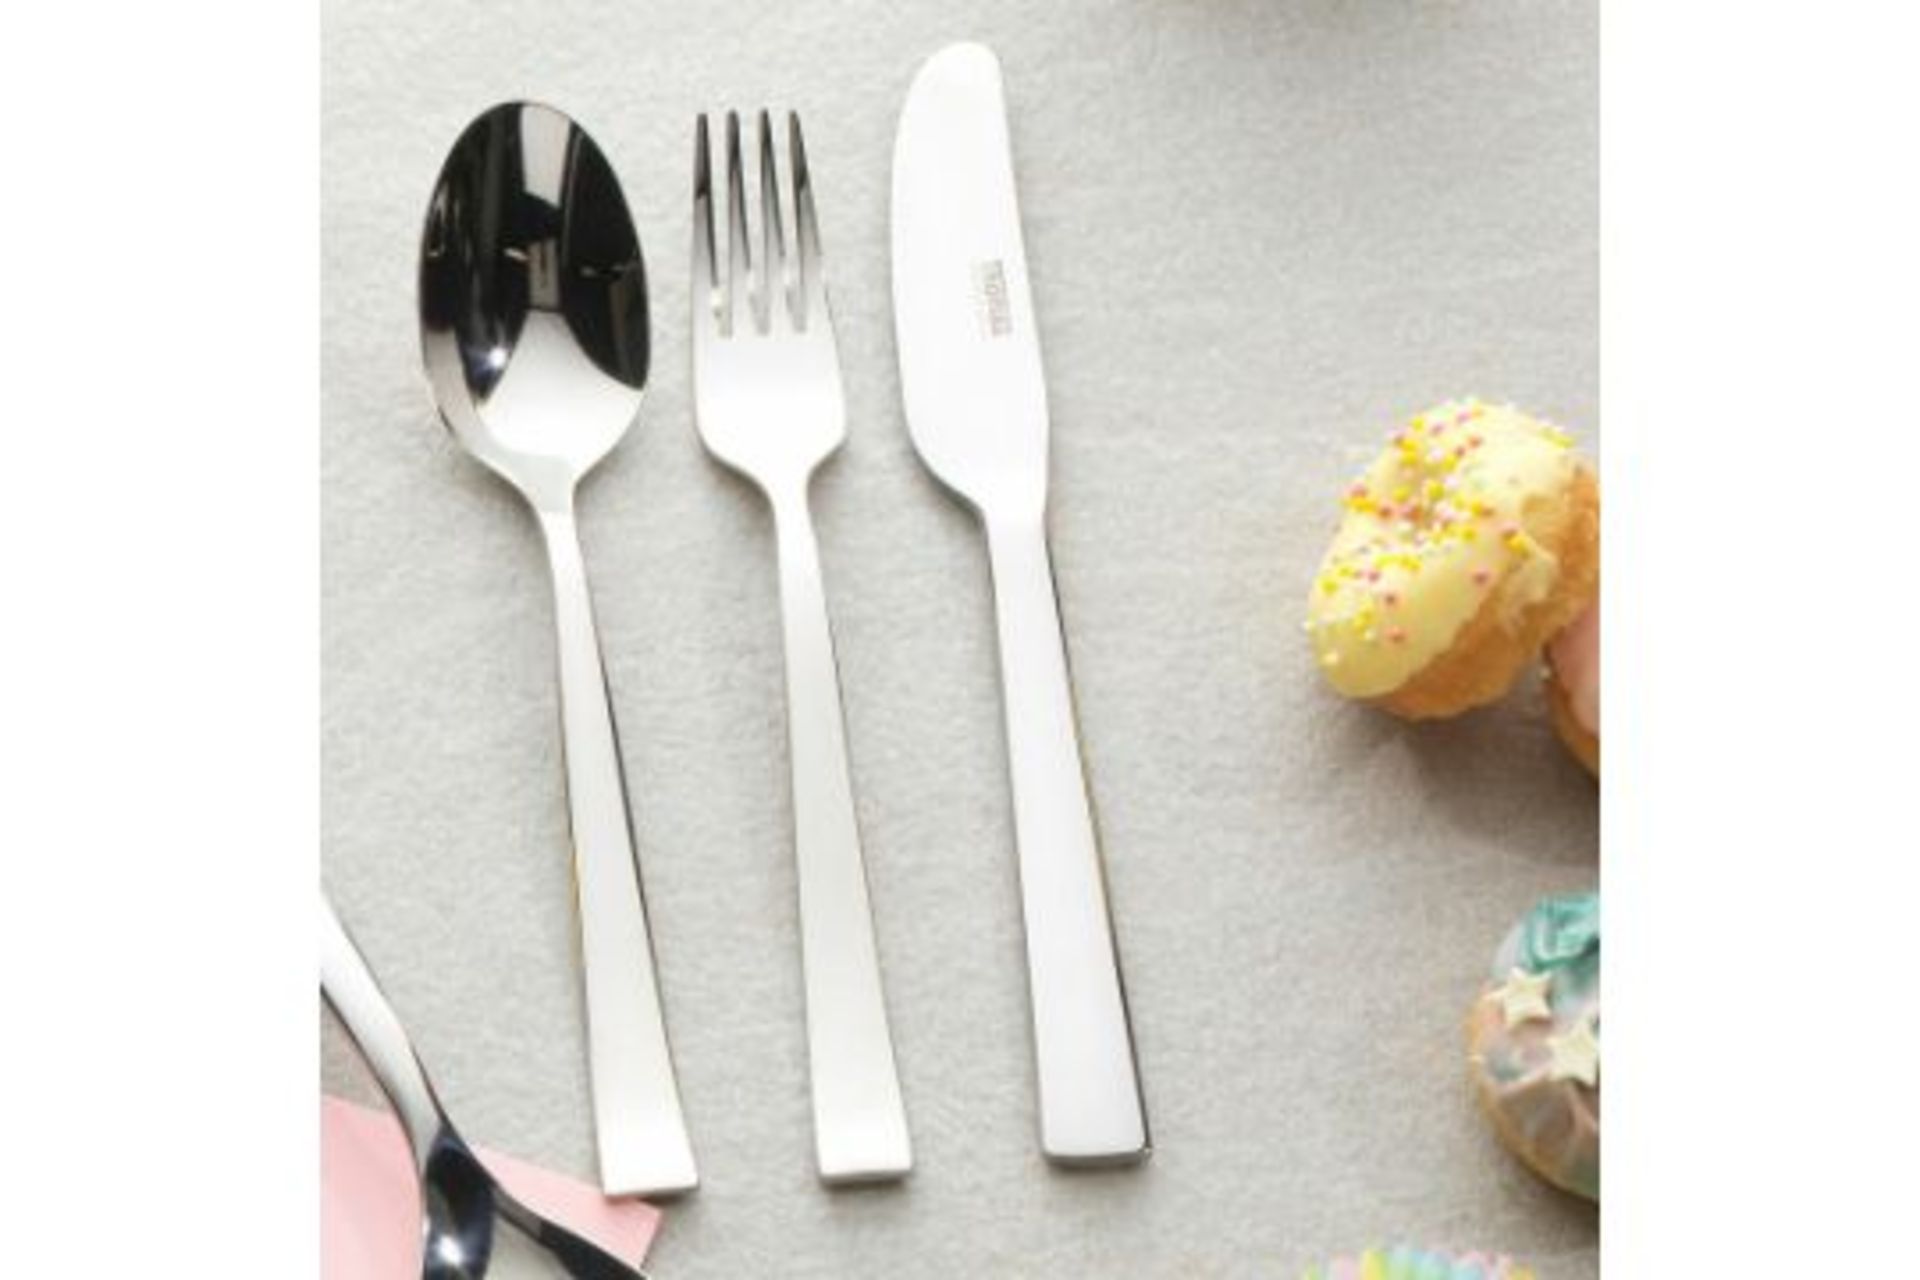 48 x New Boxed Sets of 3 Thomas Children’s Cutlery Set Stainless Steel Easy Grip Handle. RRP £24. - Image 5 of 8